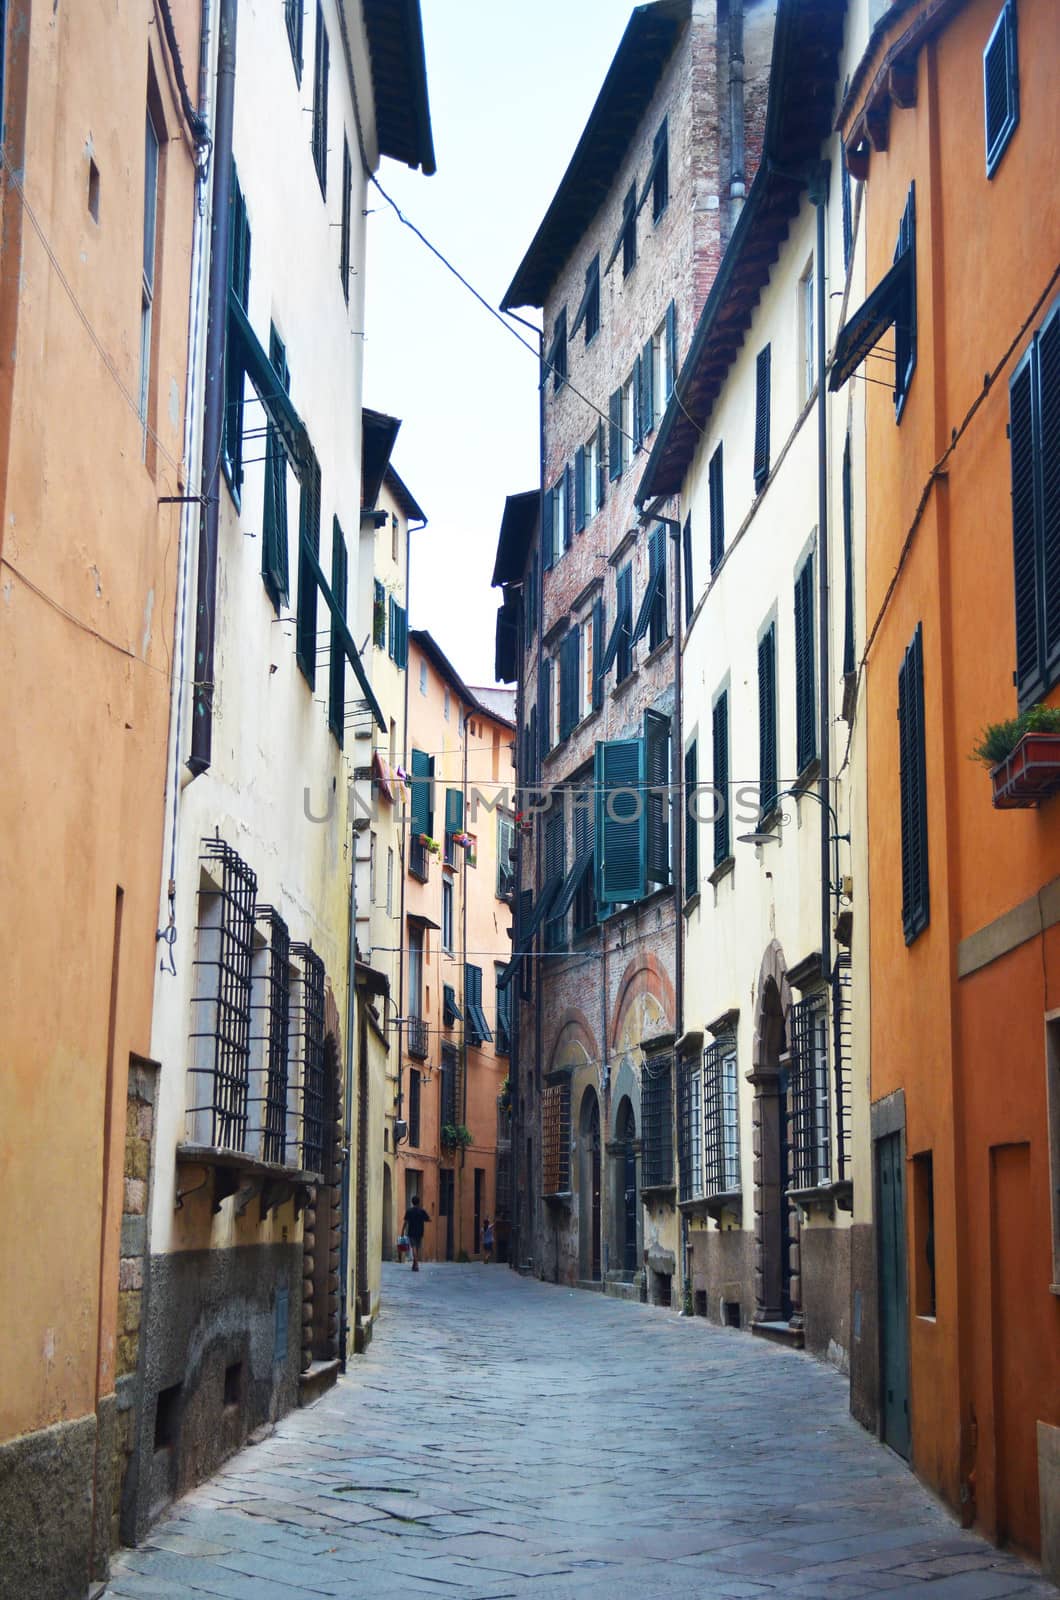 Narrow and old street or alley in italian town. Historical view of Italy